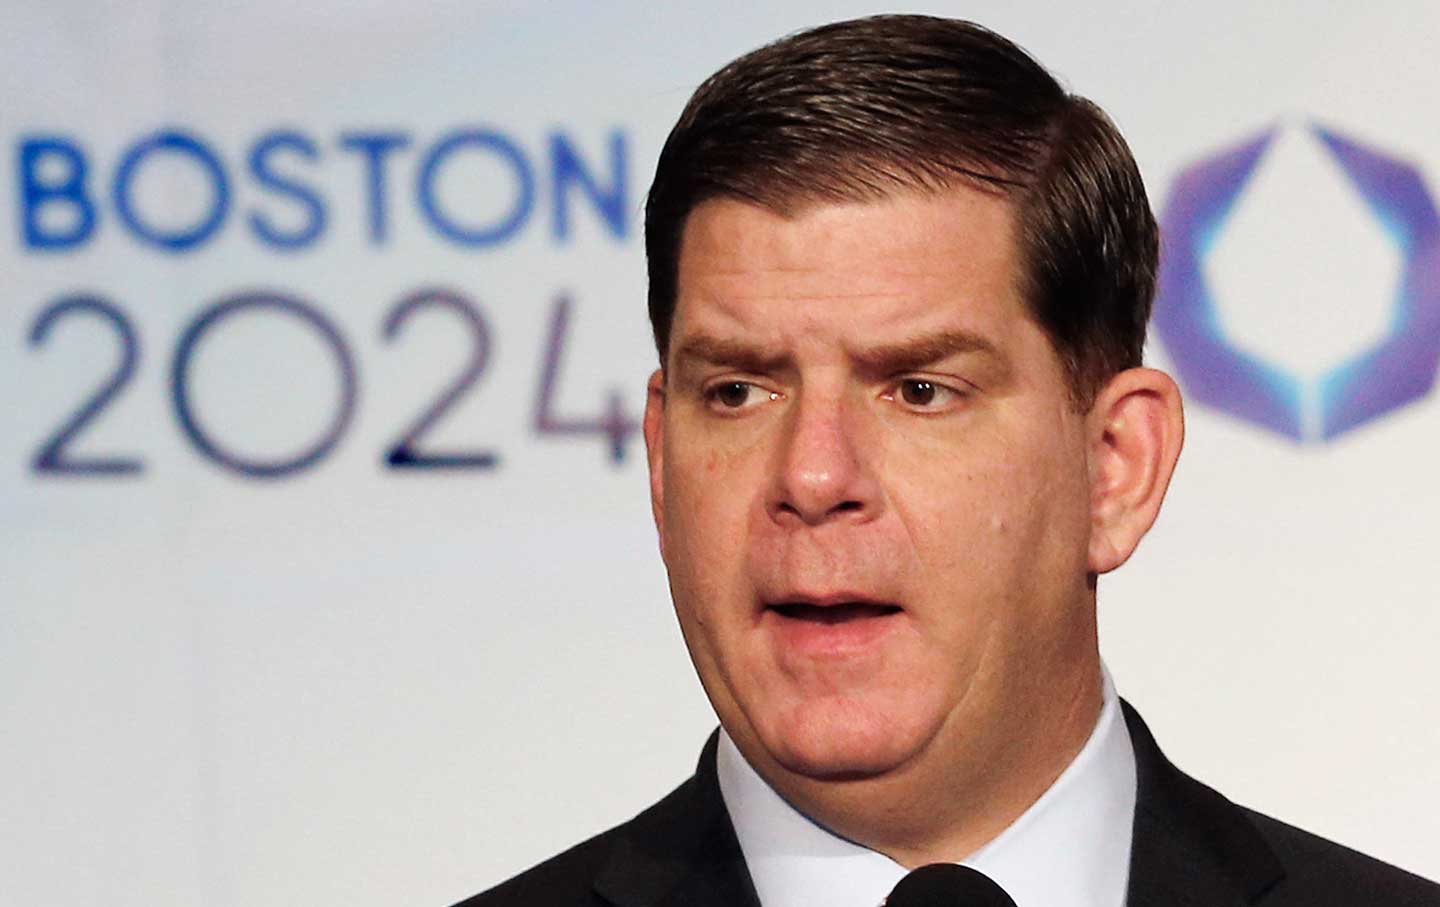 Why Boston Was Compelled to Pull Its 2024 Olympic Bid | The Nation